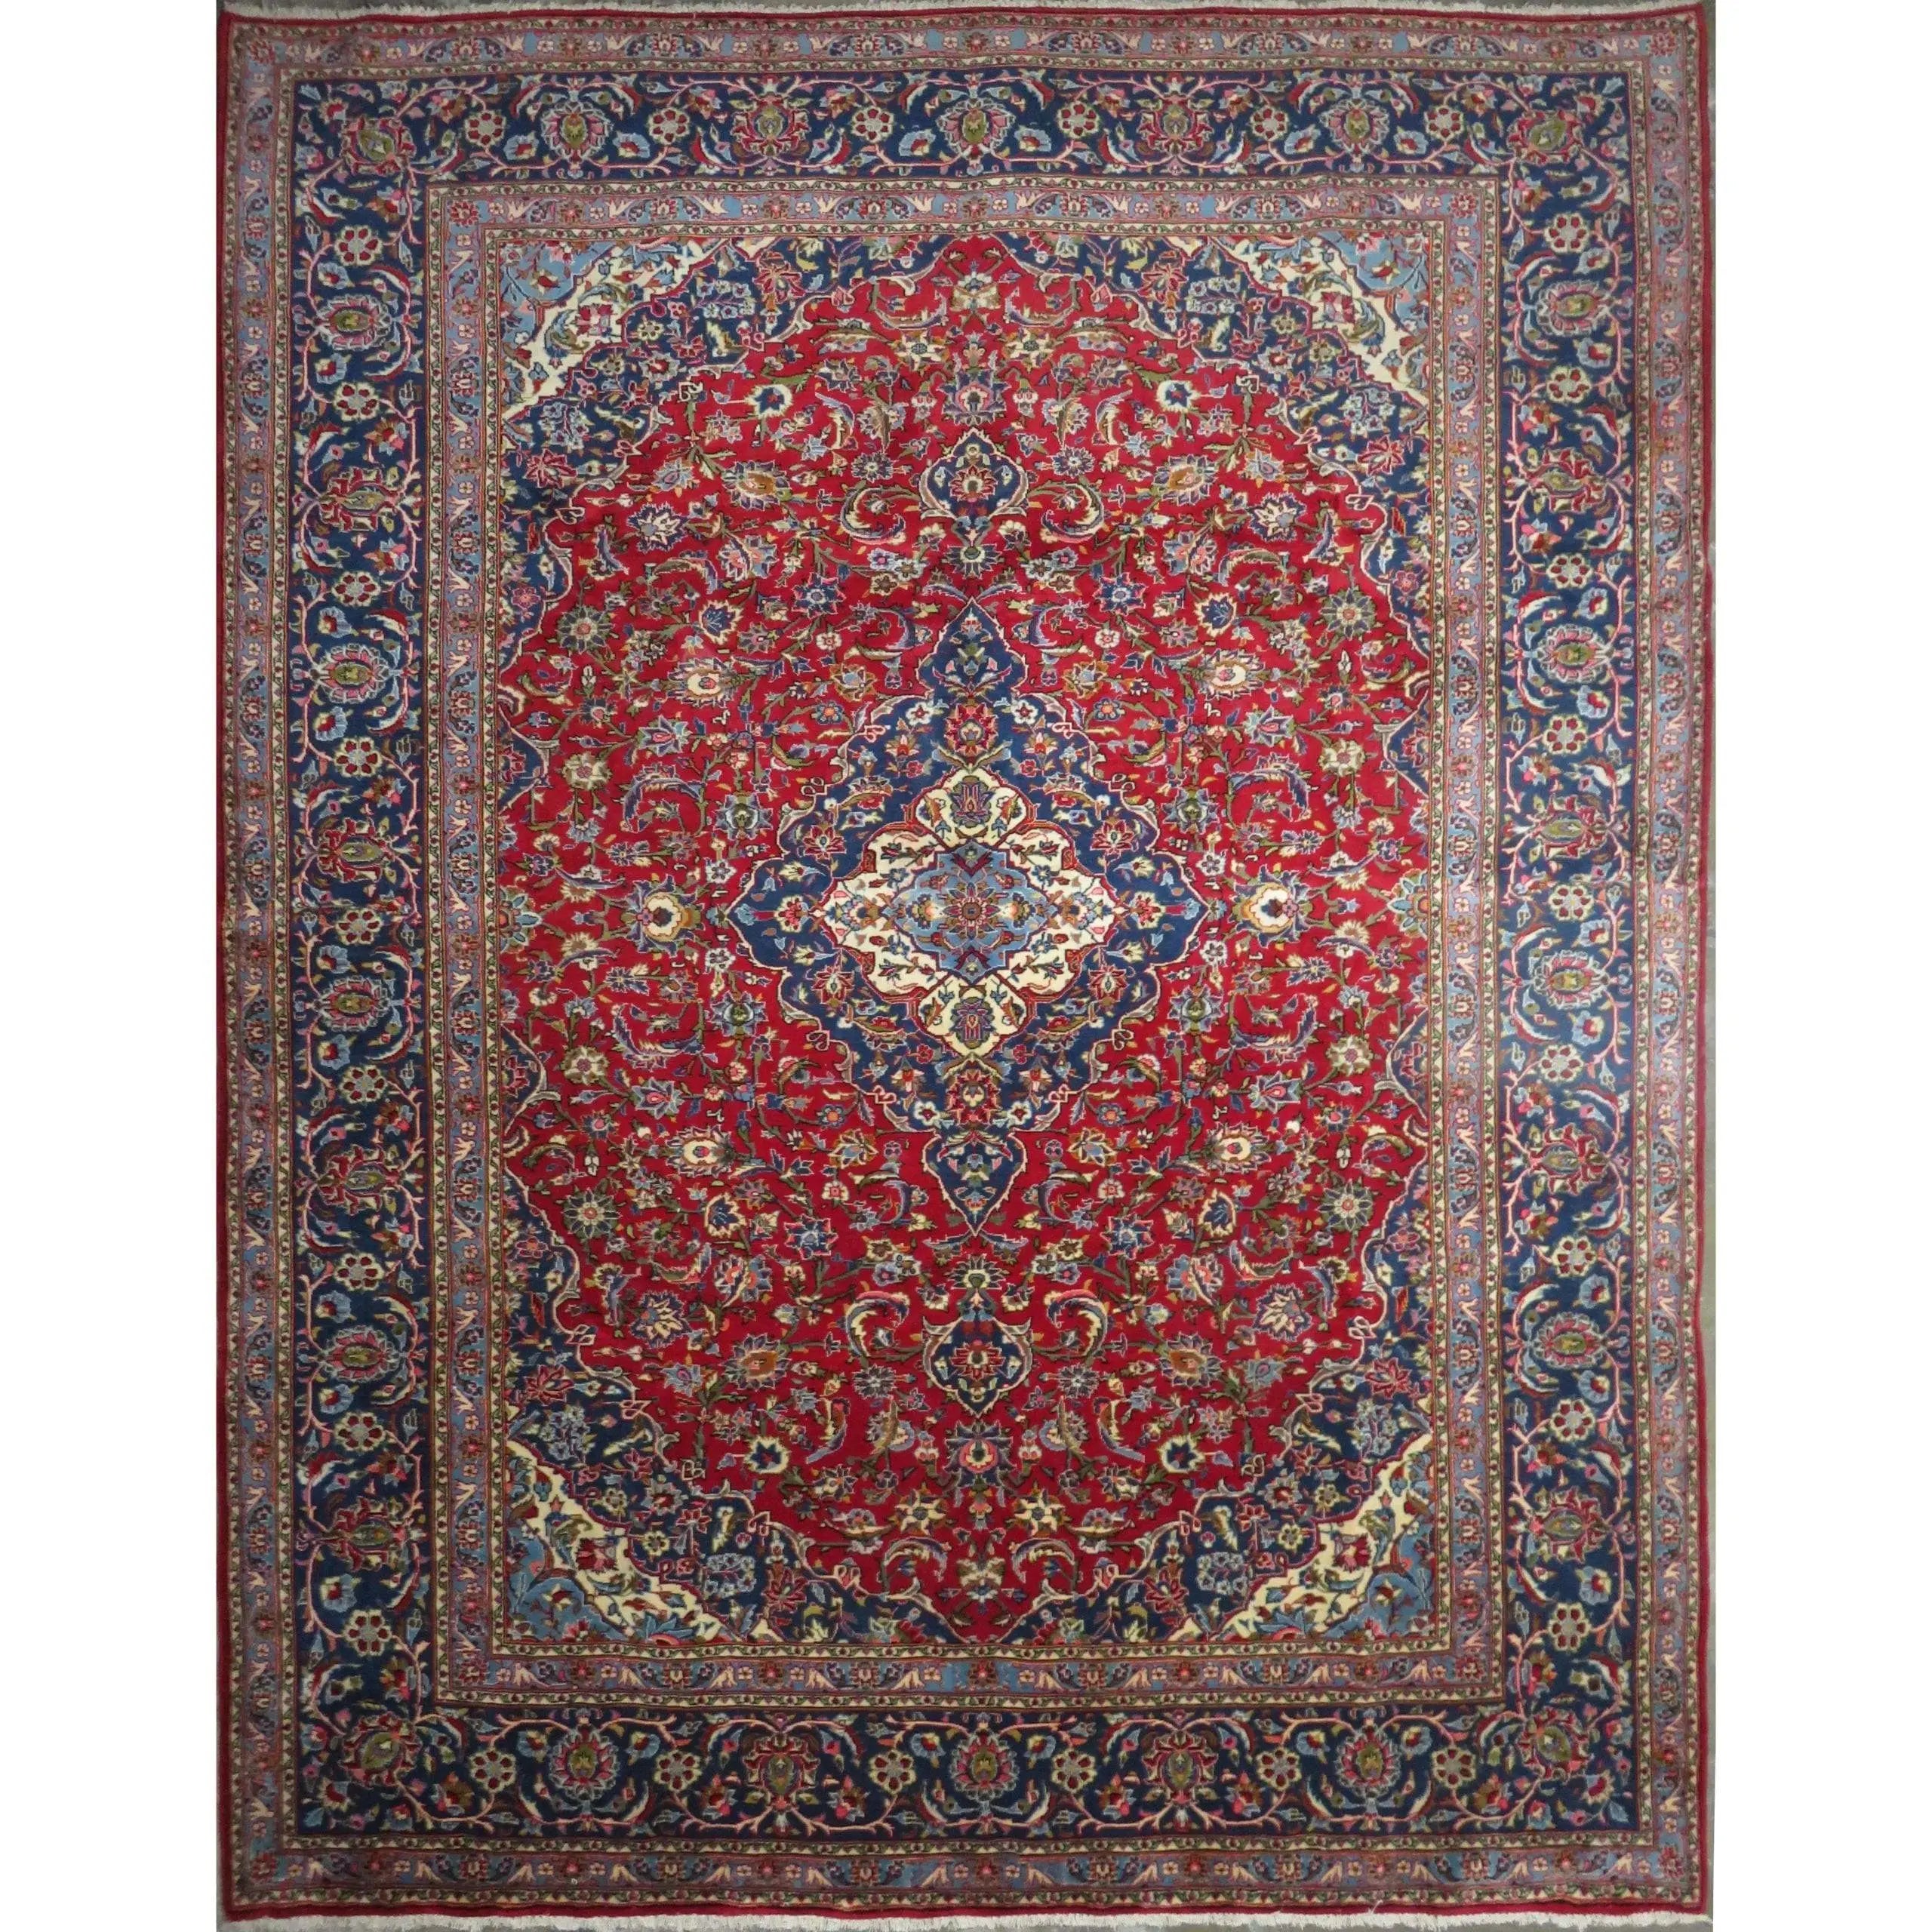 Hand-Knotted Persian Wool Rug _ Luxurious Vintage Design, 12'6" X 9'8", Artisan Crafted